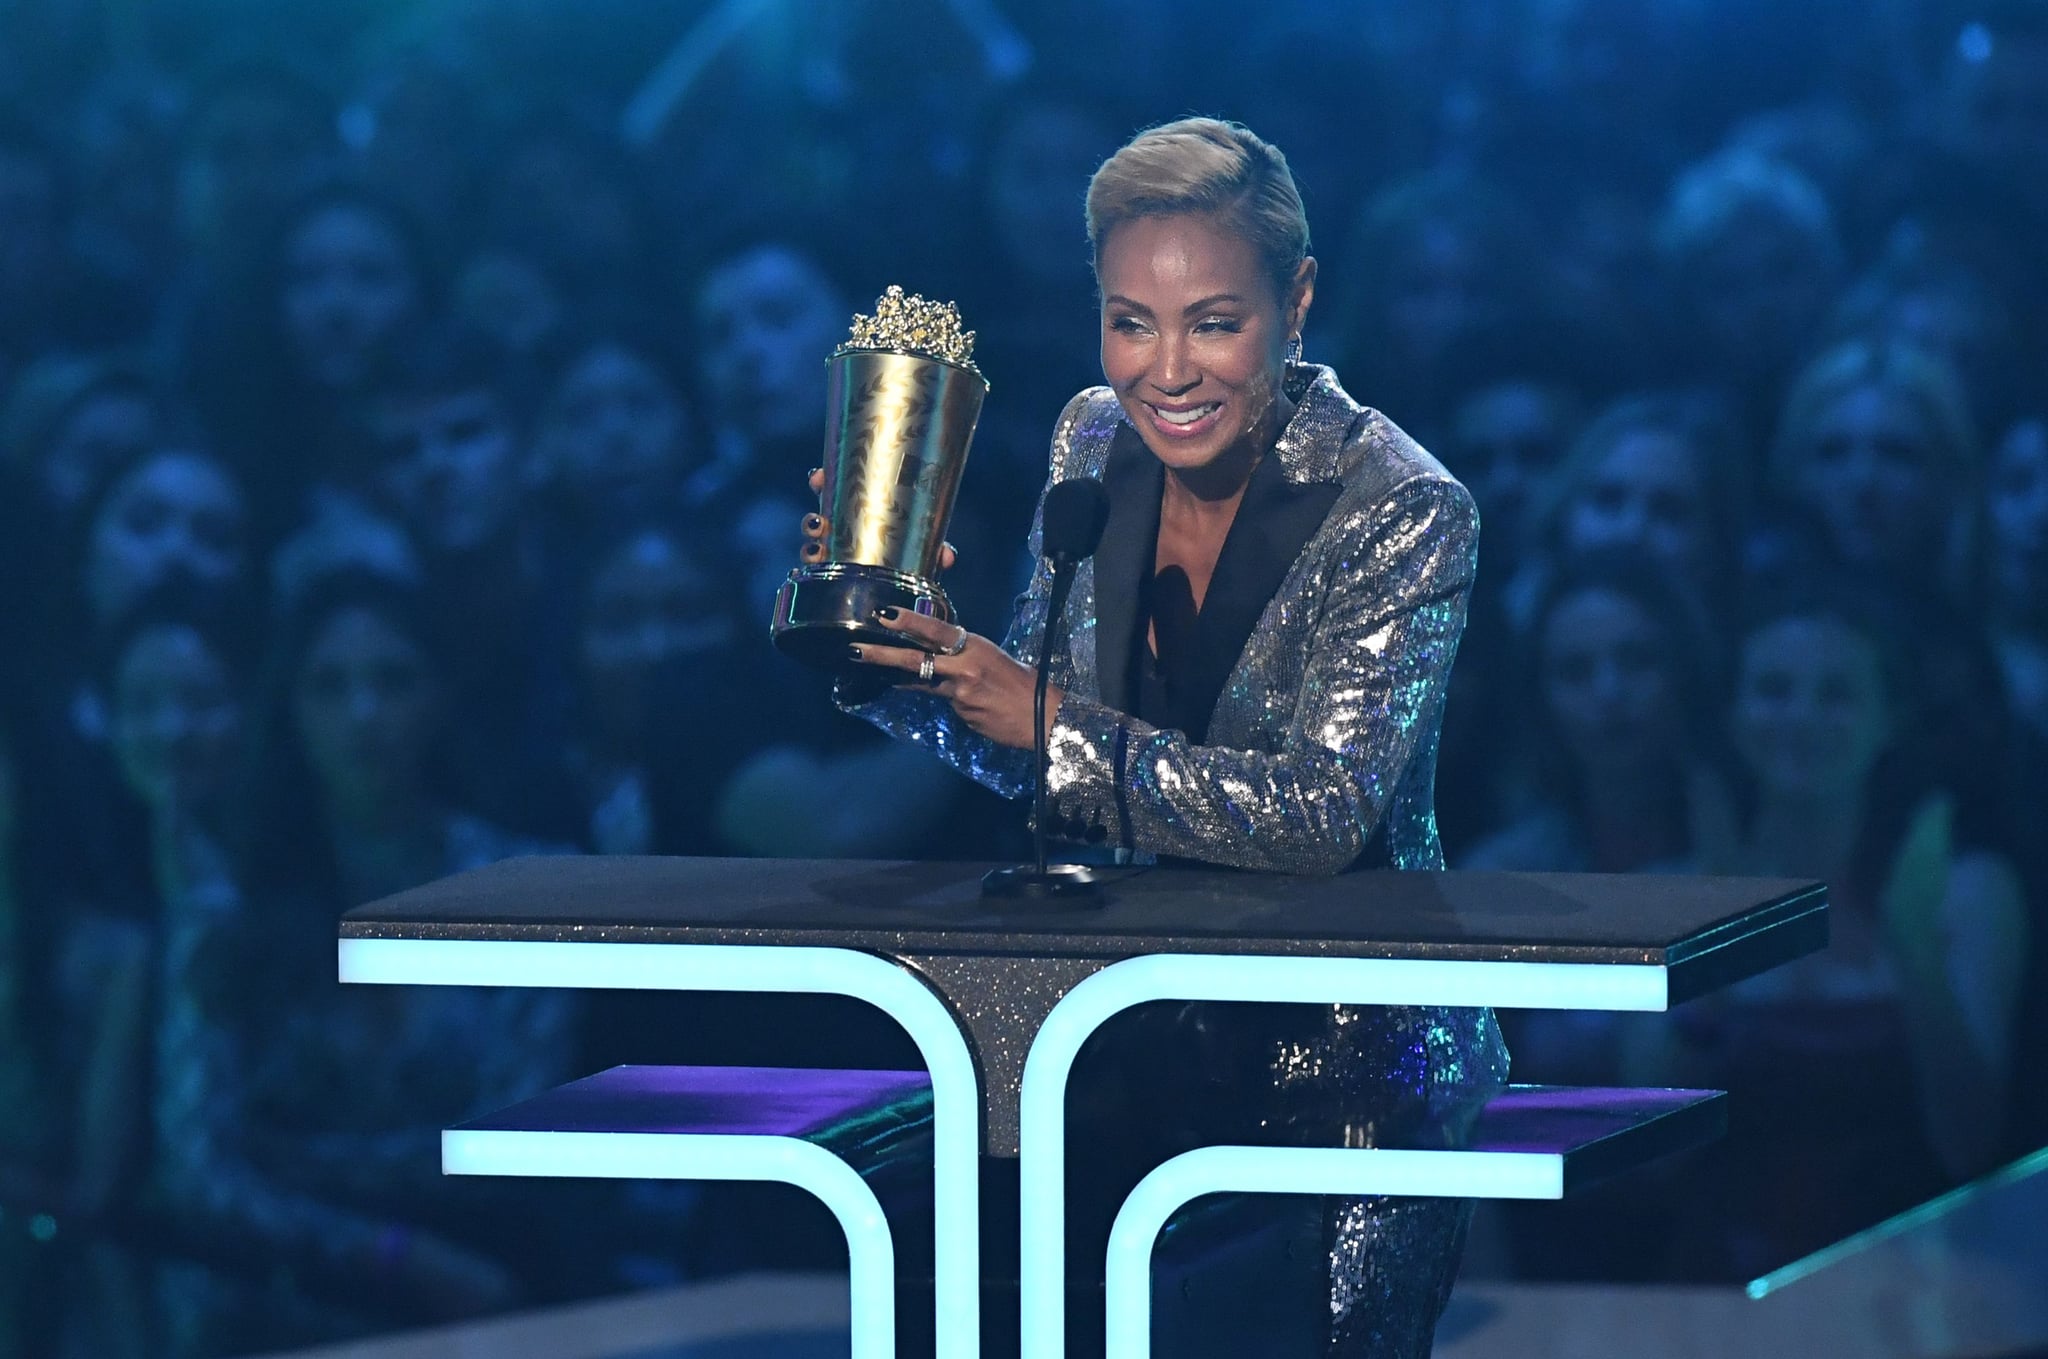 US actress Jada Pinkett Smith accepts the Trailblazer Award onstage during the 2019 MTV Movie & TV Awards at the Barker Hangar in Santa Monica on June 15, 2019. - The 2019 MTV Movie & TV Awards were filmed on June 15 and air on June 17. (Photo by VALERIE MACON / AFP)        (Photo credit should read VALERIE MACON/AFP/Getty Images)